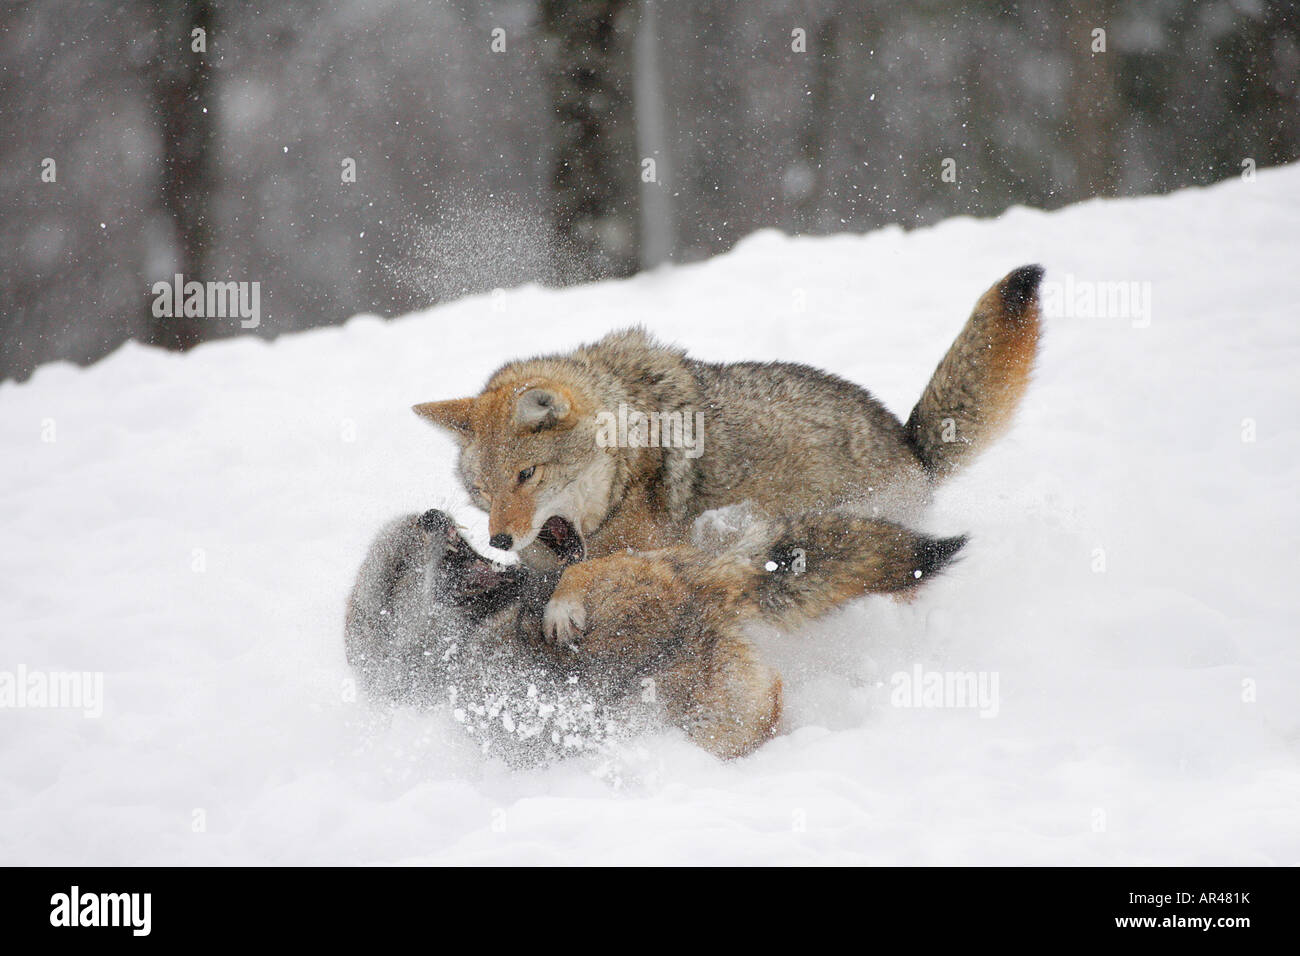 Two Coyotes fighting, teeth bared, snow flying Stock Photo